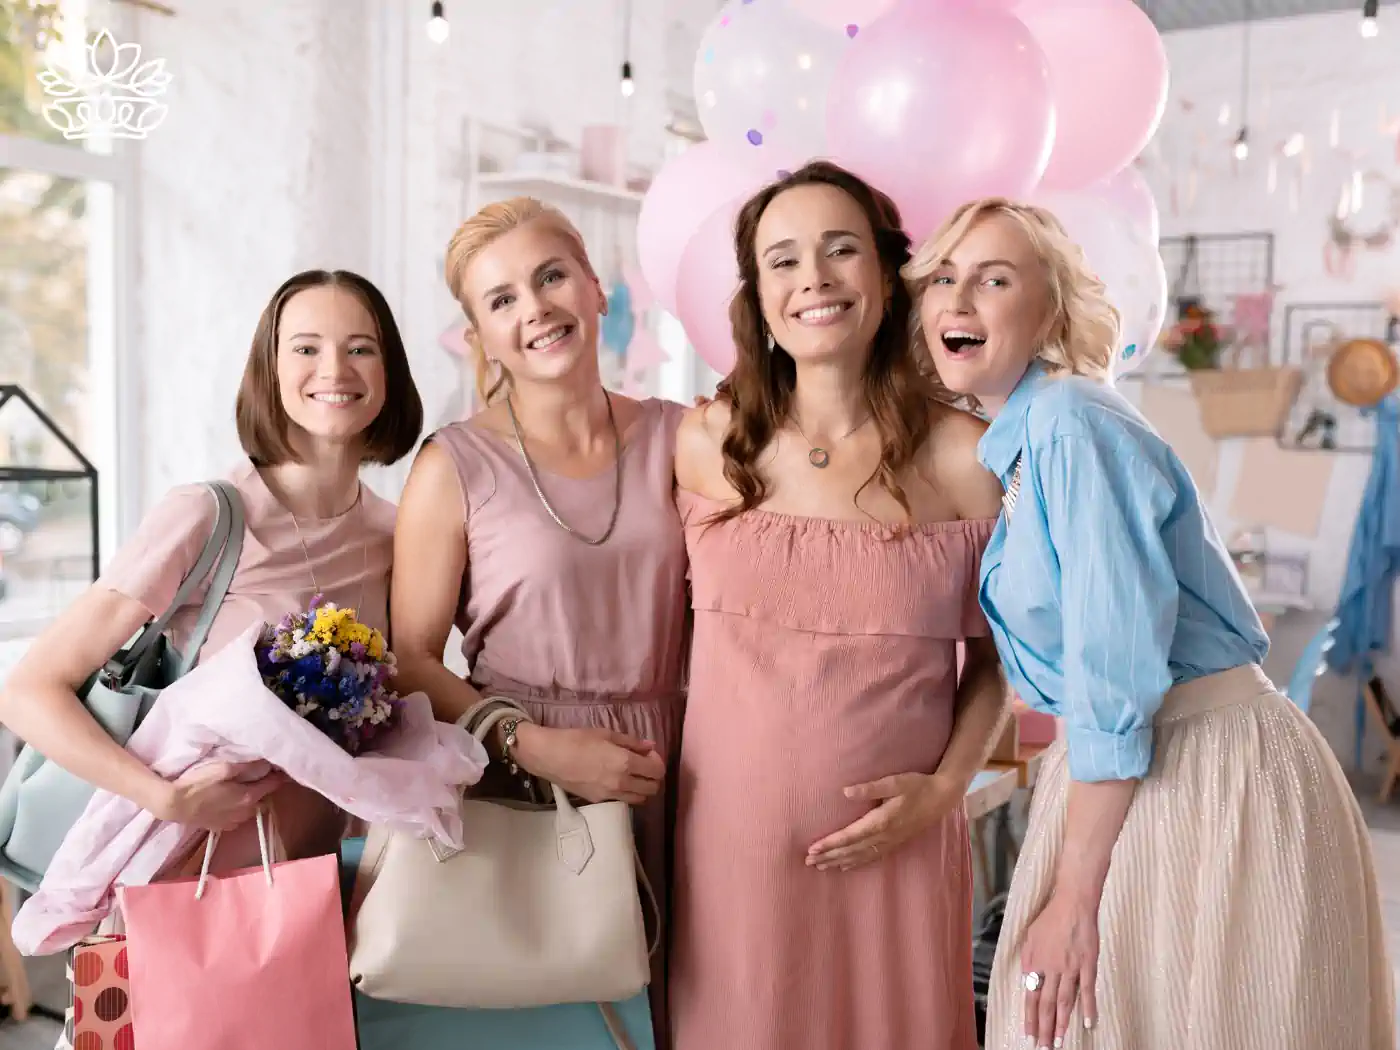 Four women smiling and posing at a baby shower, holding gifts and flowers, with pink balloons in the background. Fabulous Flowers and Gifts: Baby Shower Flowers Collection